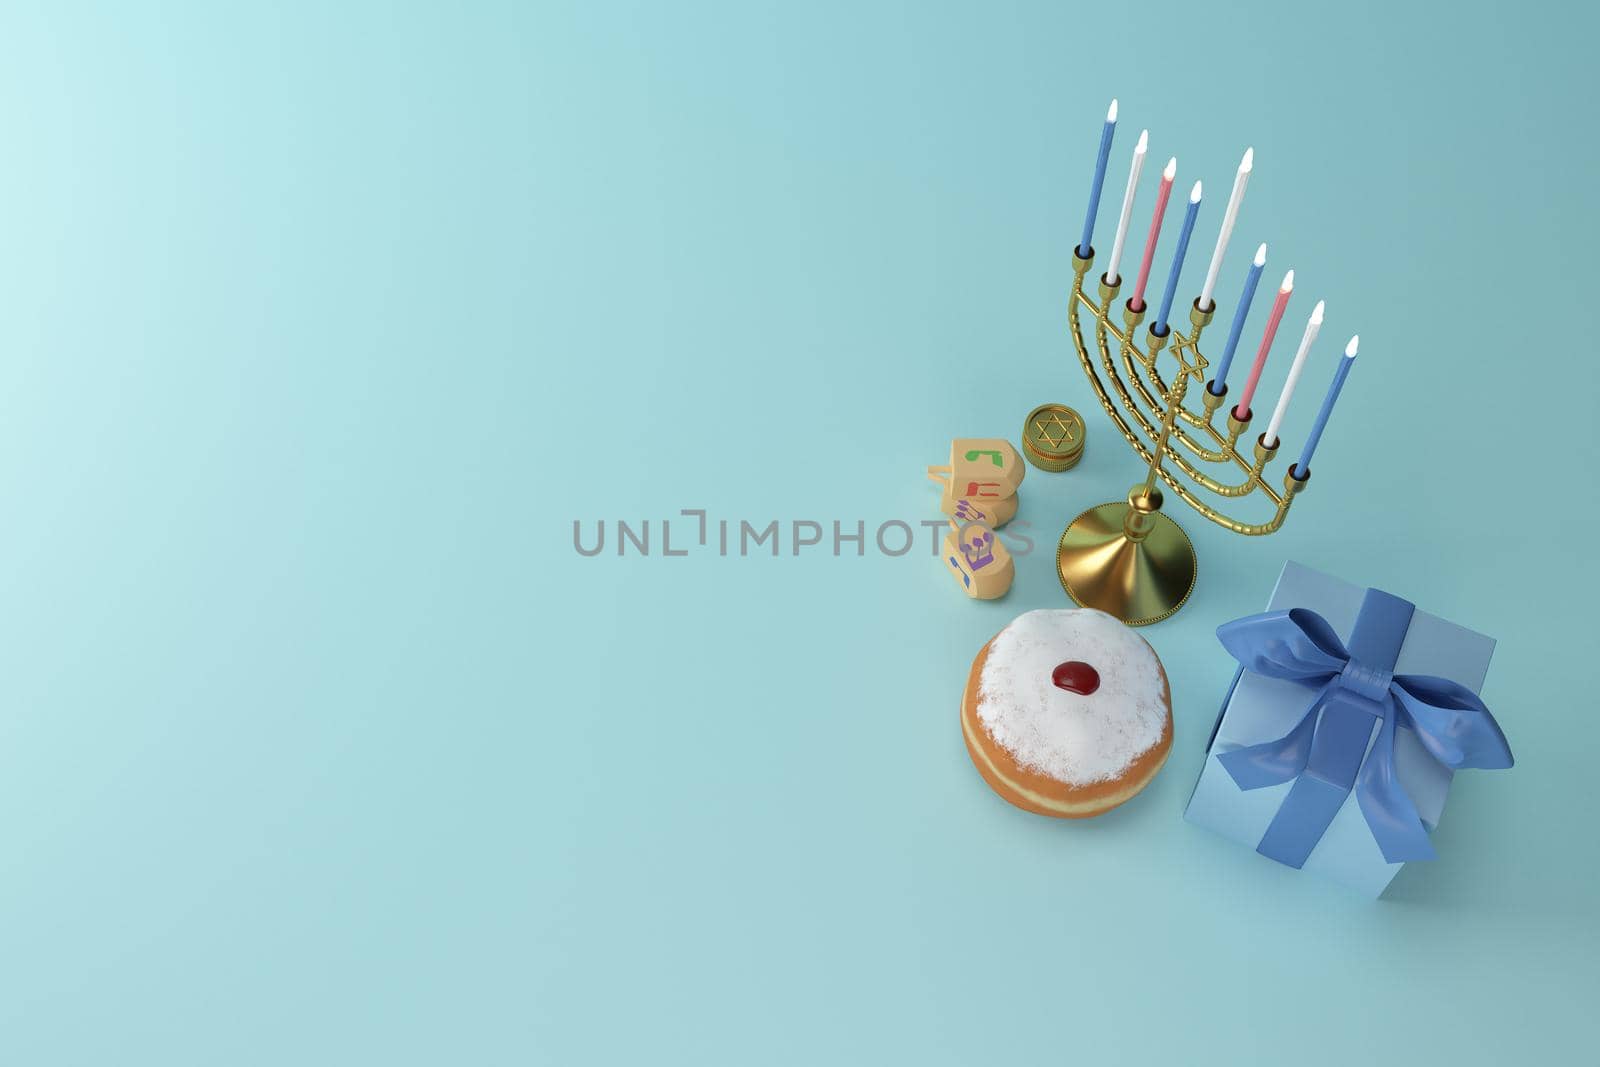 3d rendering Image of Jewish holiday Hanukkah with menorah or traditional Candelabra,gif box, jar ,gold coin and wooden dreidels or spinning top on a  blue background.